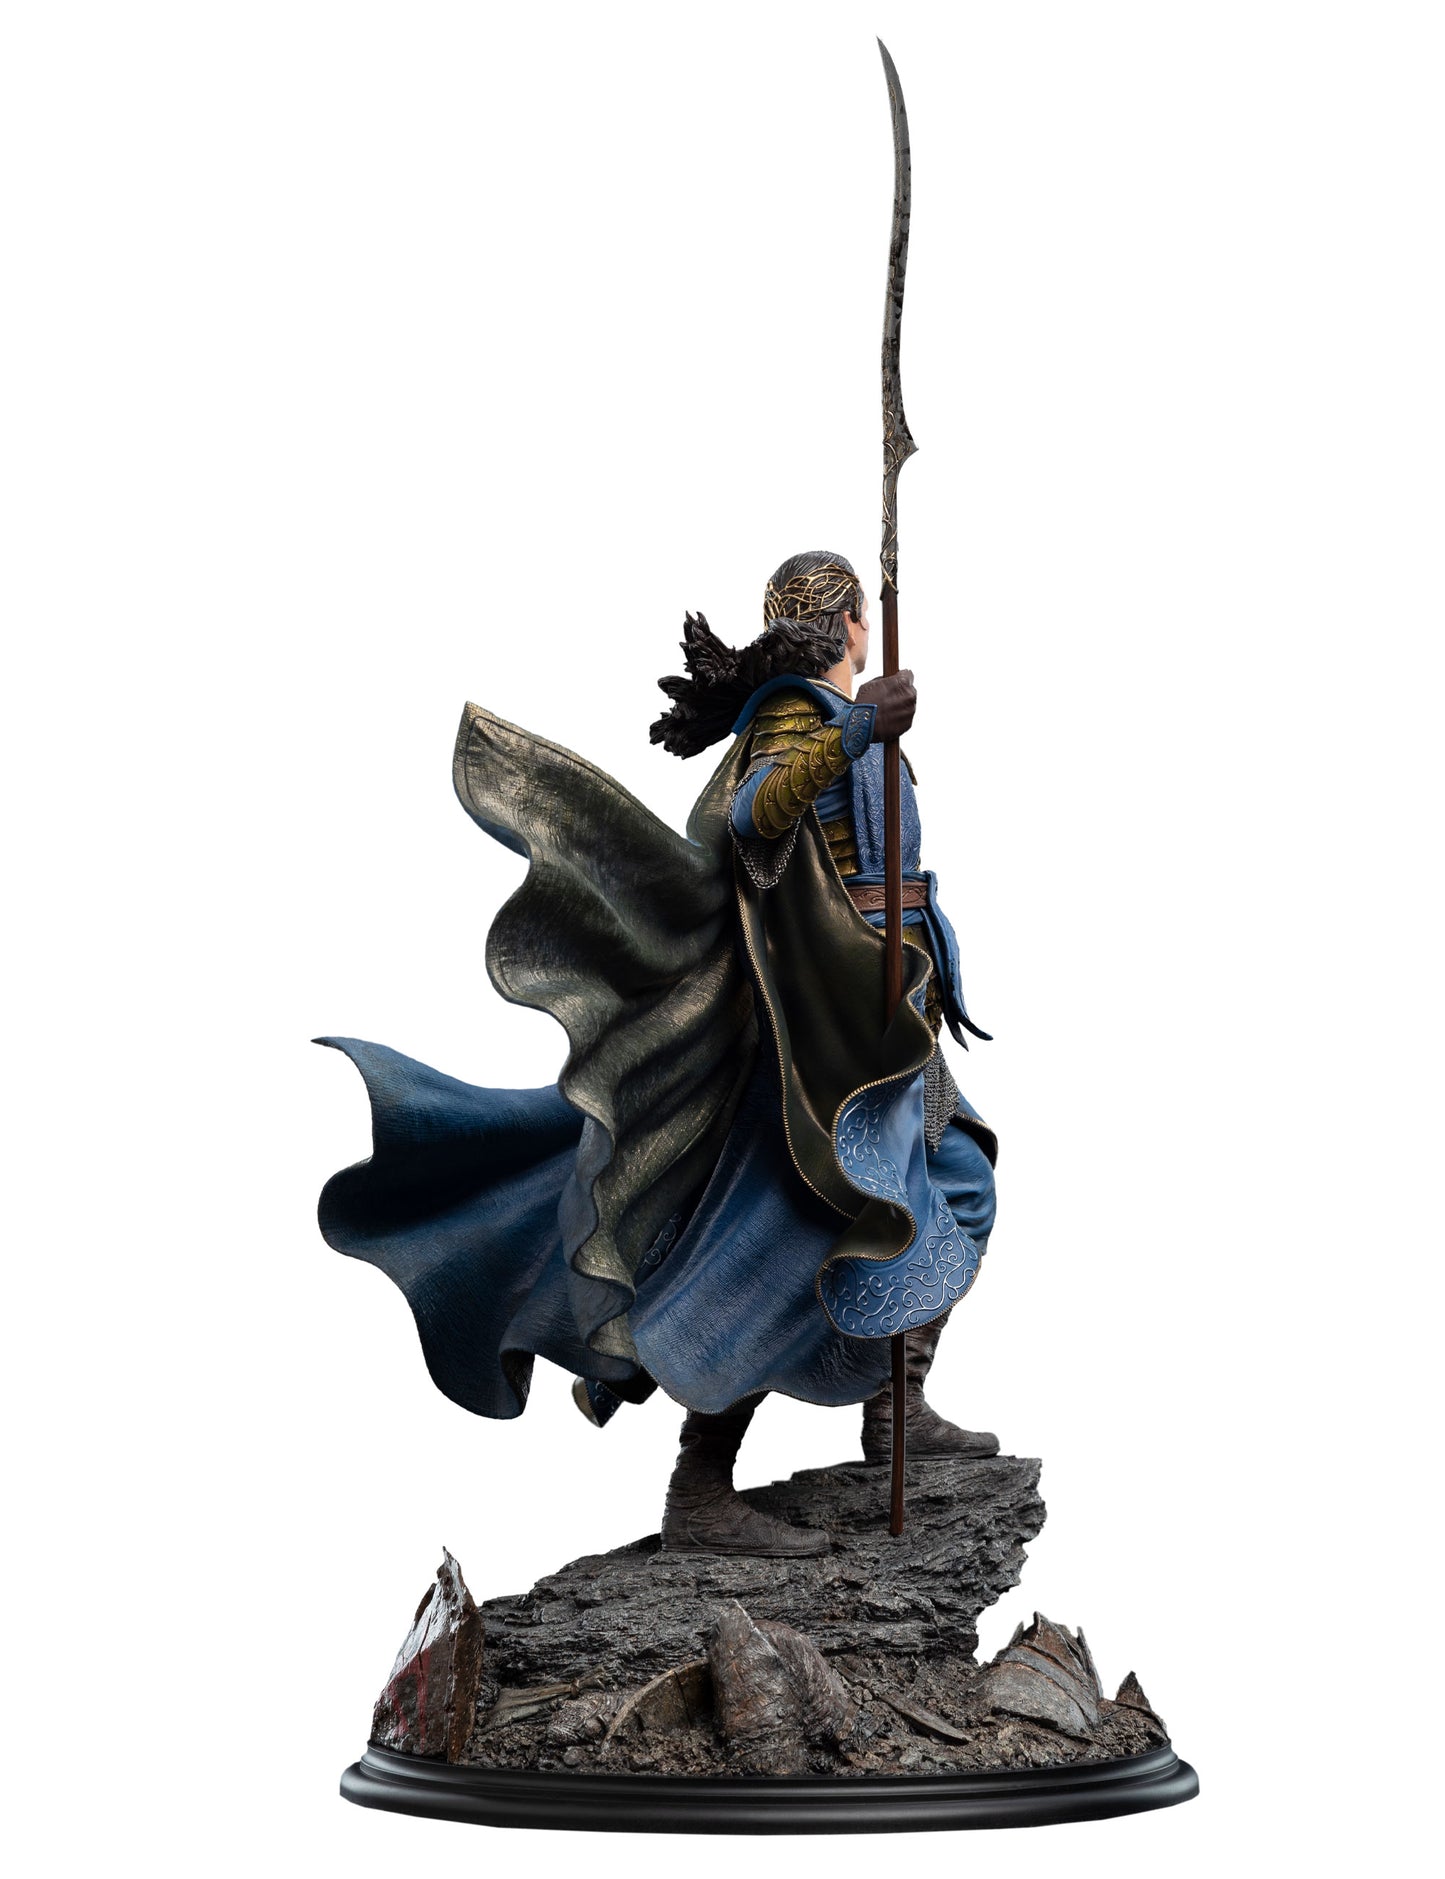 Load image into Gallery viewer, *Pre-Order* Gil-galad (Lord of the Rings) 1:6 Scale 20th Anniversary Limited Edition Statue by Weta Workshop
